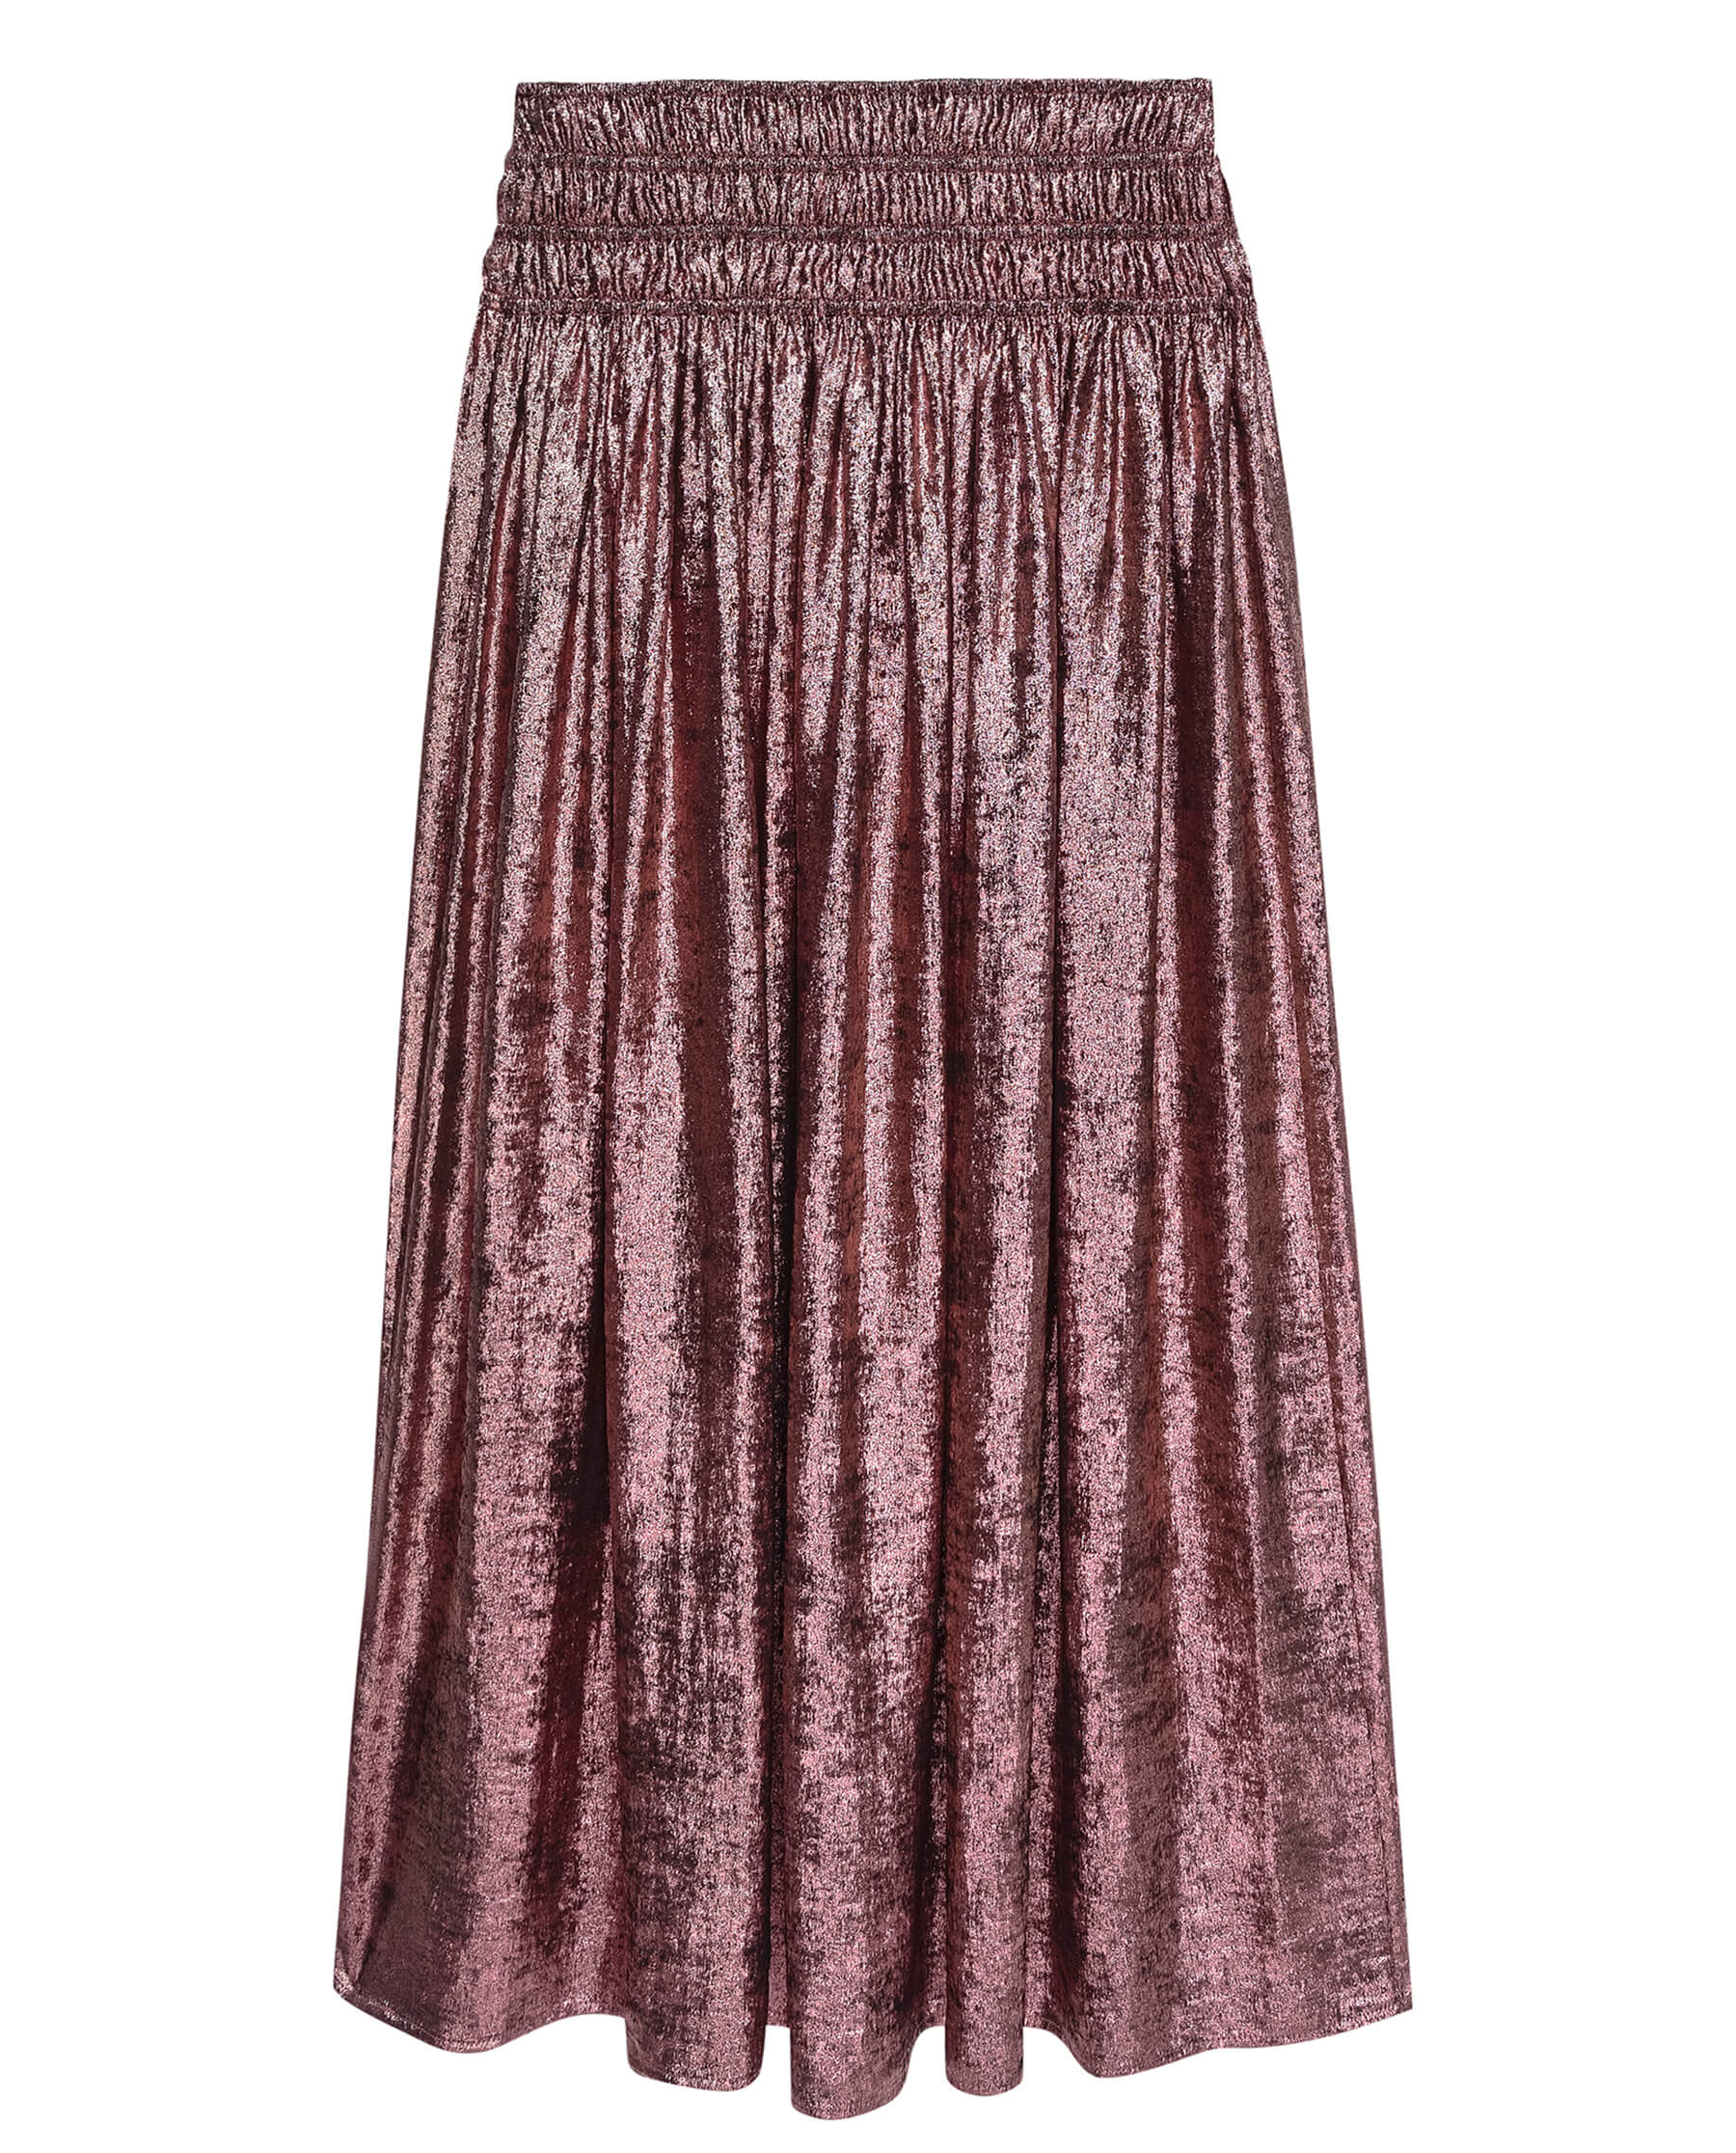 The Viola Skirt. -- Rose Gold SKIRTS THE GREAT. HOL 23 METALLICS SALE